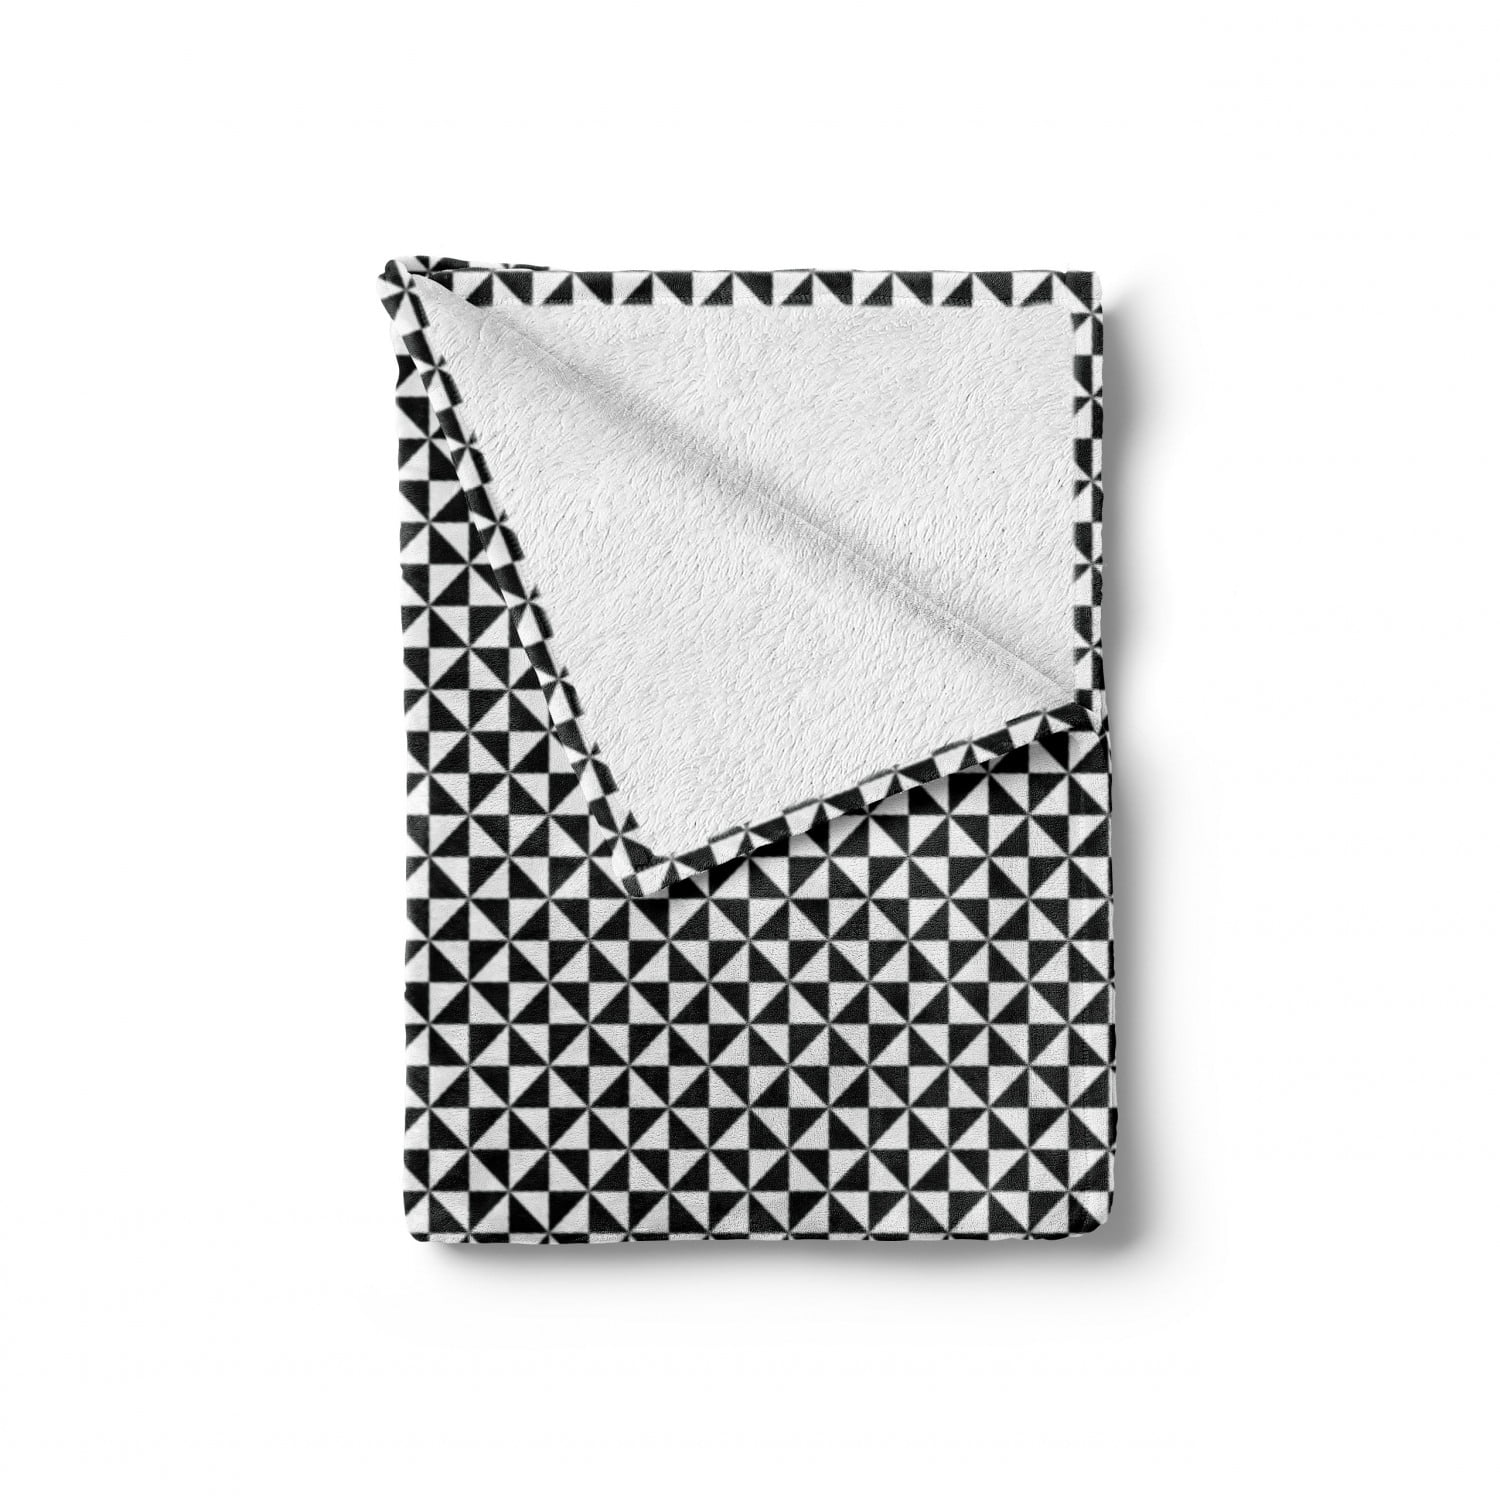 Black and White Cozy Plush for Indoor and Outdoor Use 70 x 90 2 Toned Triangles Forming Squares Contemporary Contrast Abstract Motif Ambesonne Pinwheel Soft Flannel Fleece Throw Blanket 